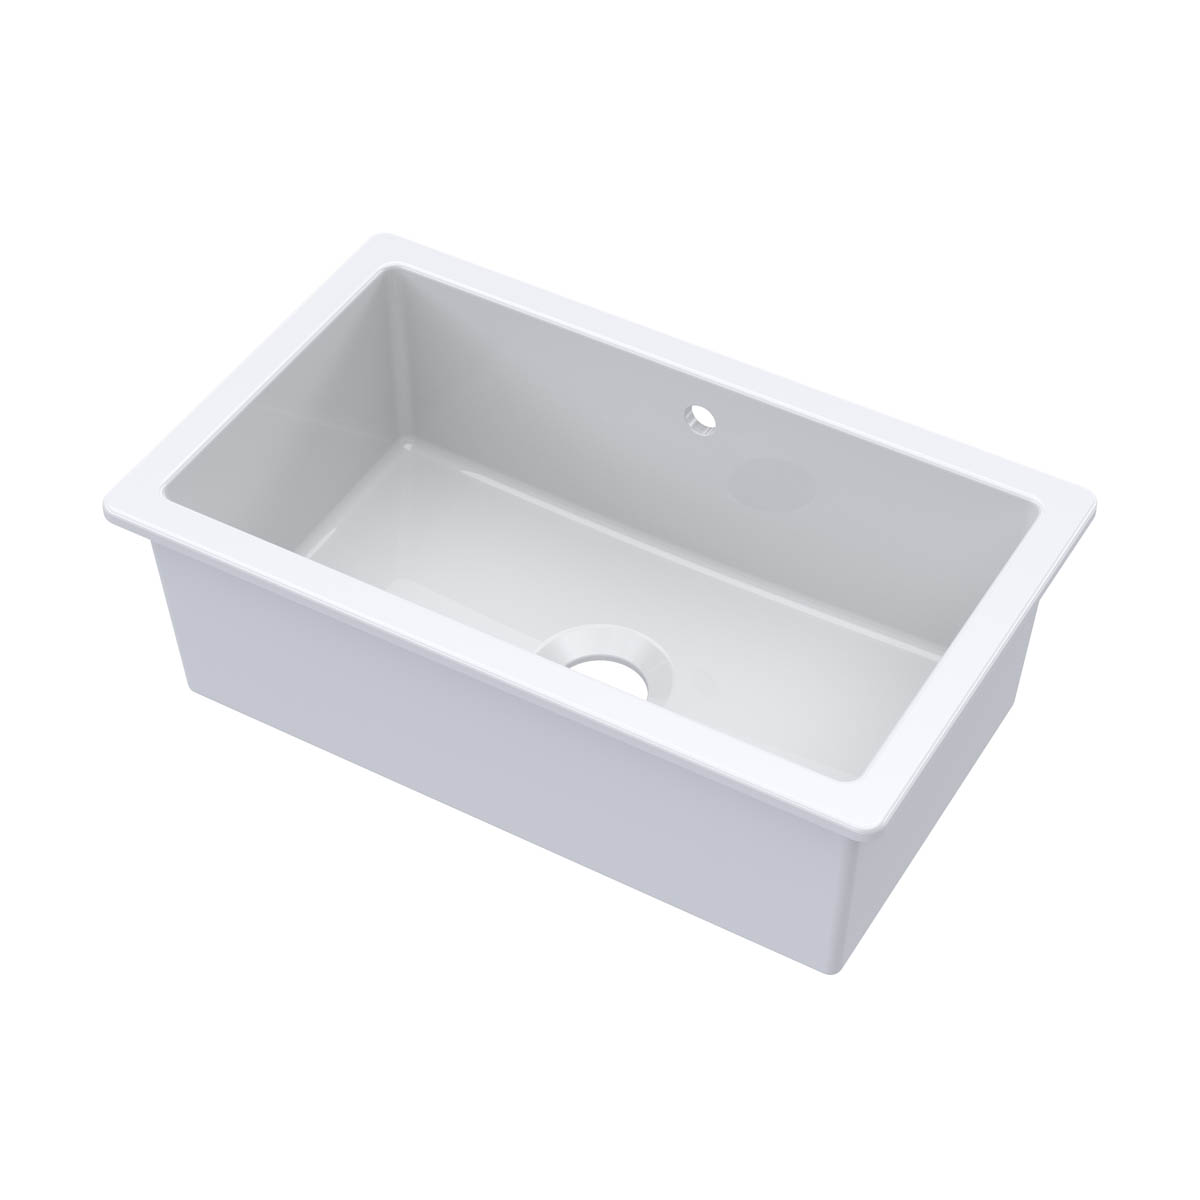 Nuie 762x457x254mm Inset or Undermount Sink with 90mm Central Waste & Overflow - White (20322)